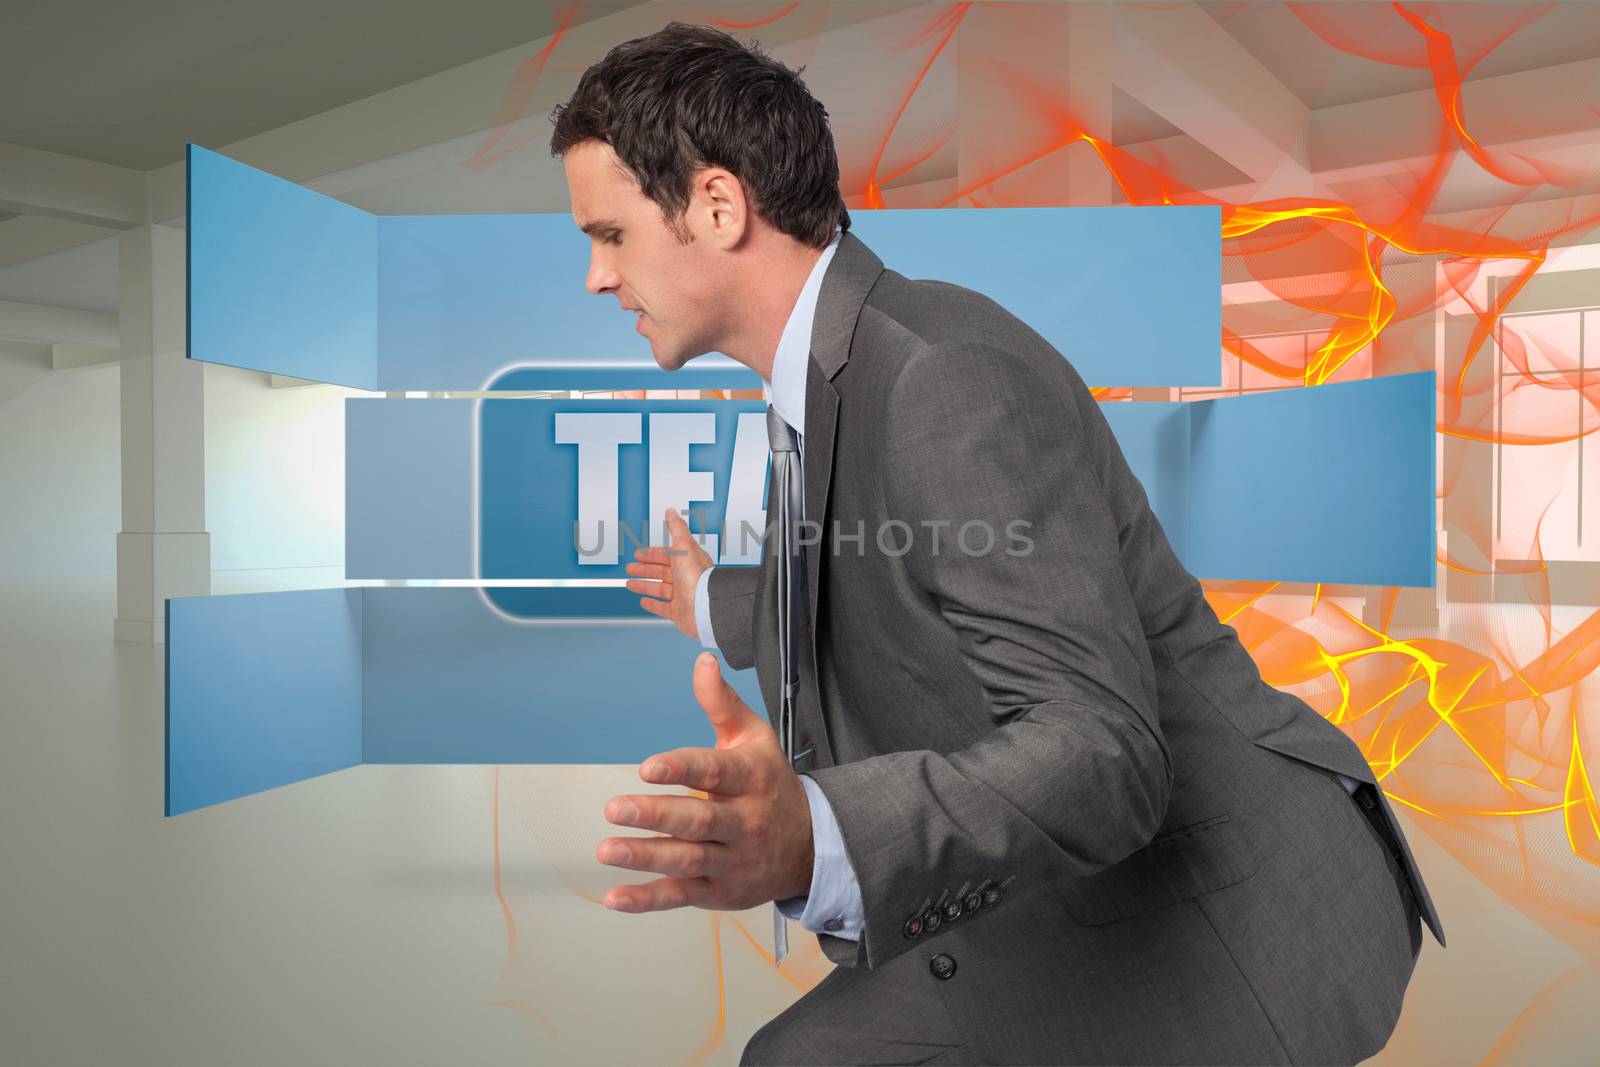 Businessman posing with hands out against abstract design in orange